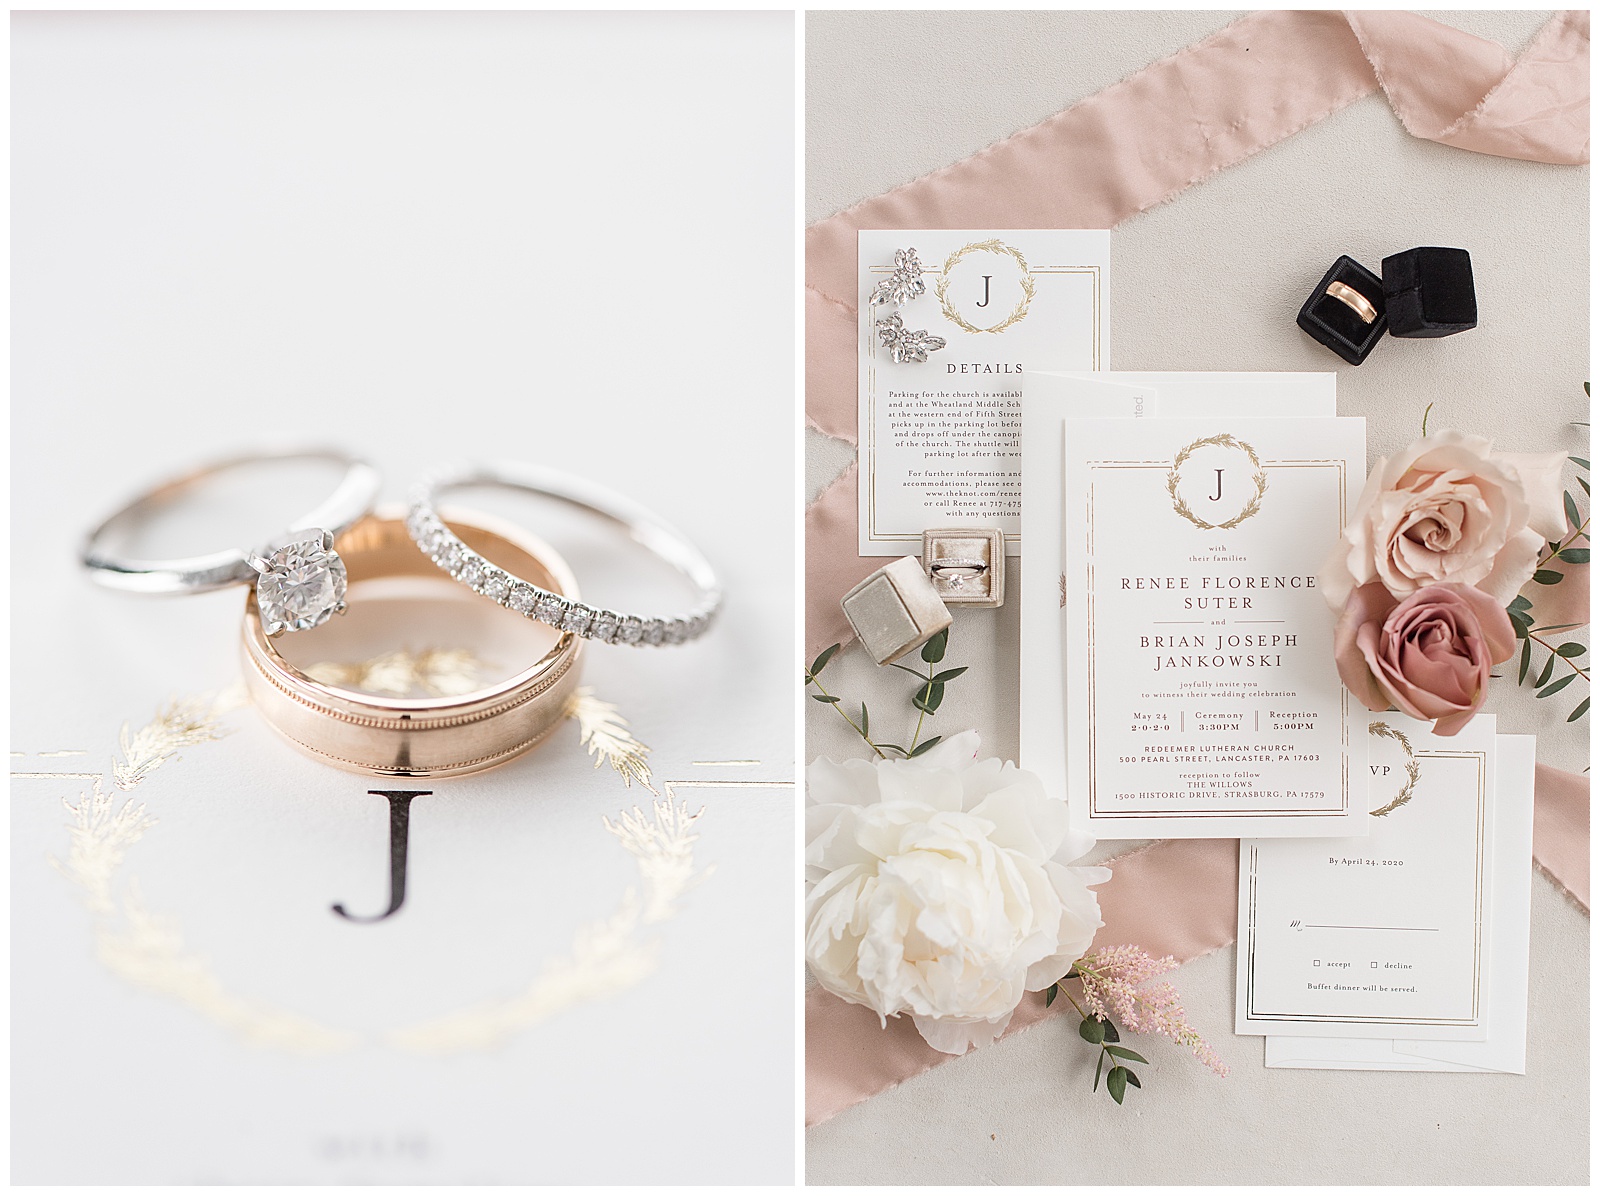 wedding rings stacked neatly and wedding invitation displayed with flowers and rings and blush fabric strips